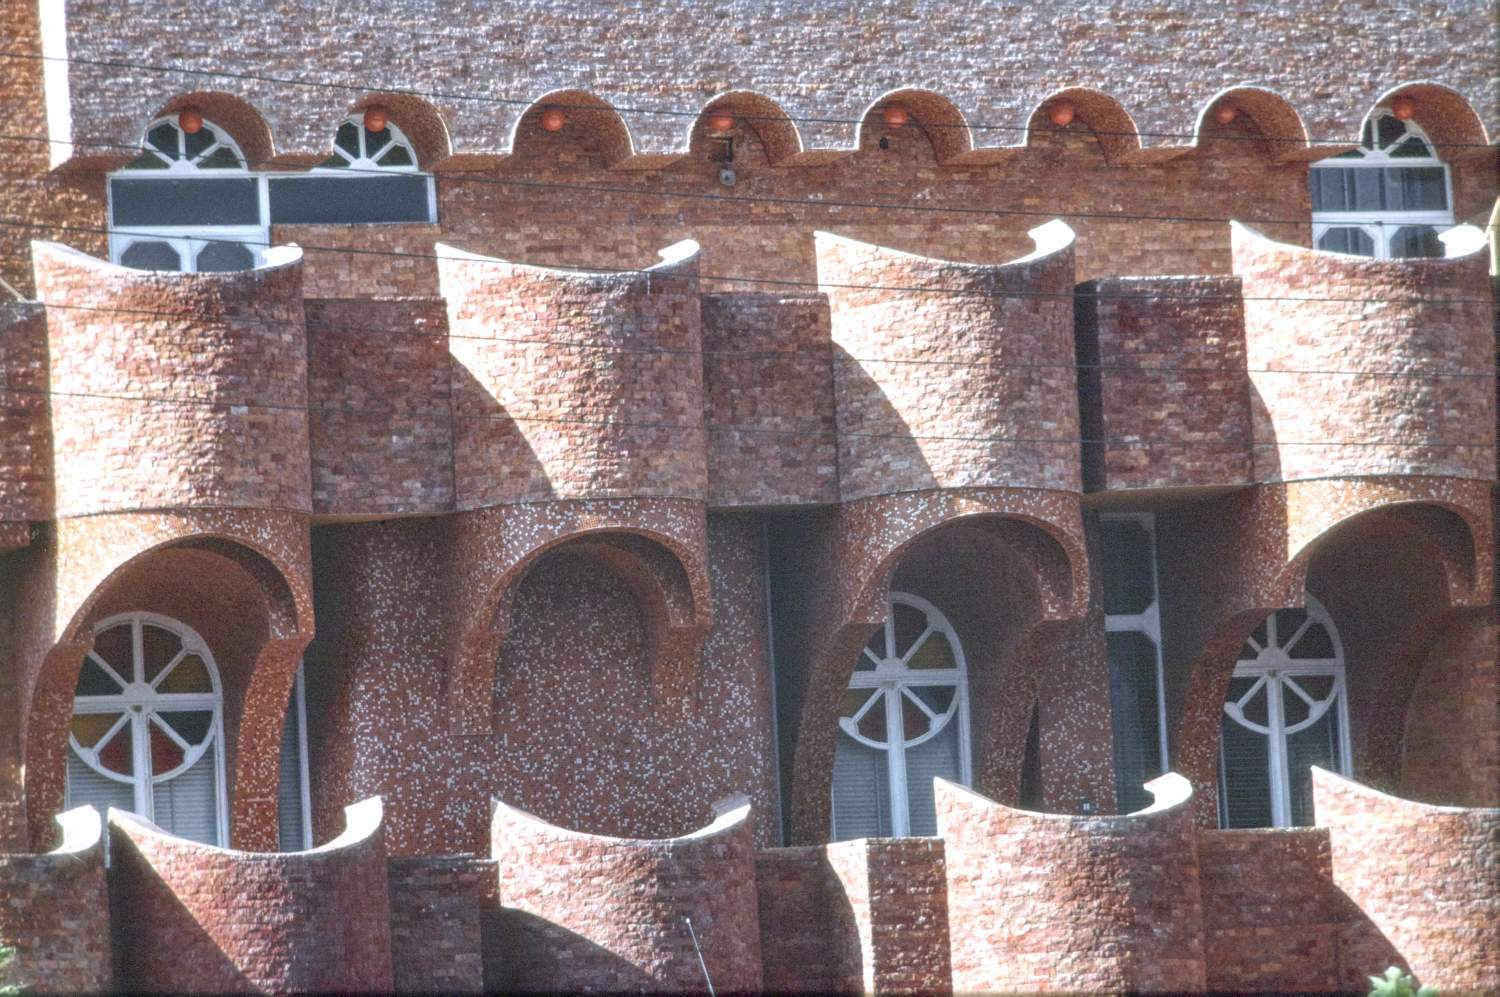 House 1 (IUHP Site) - Detail view of facade showing balconies. 